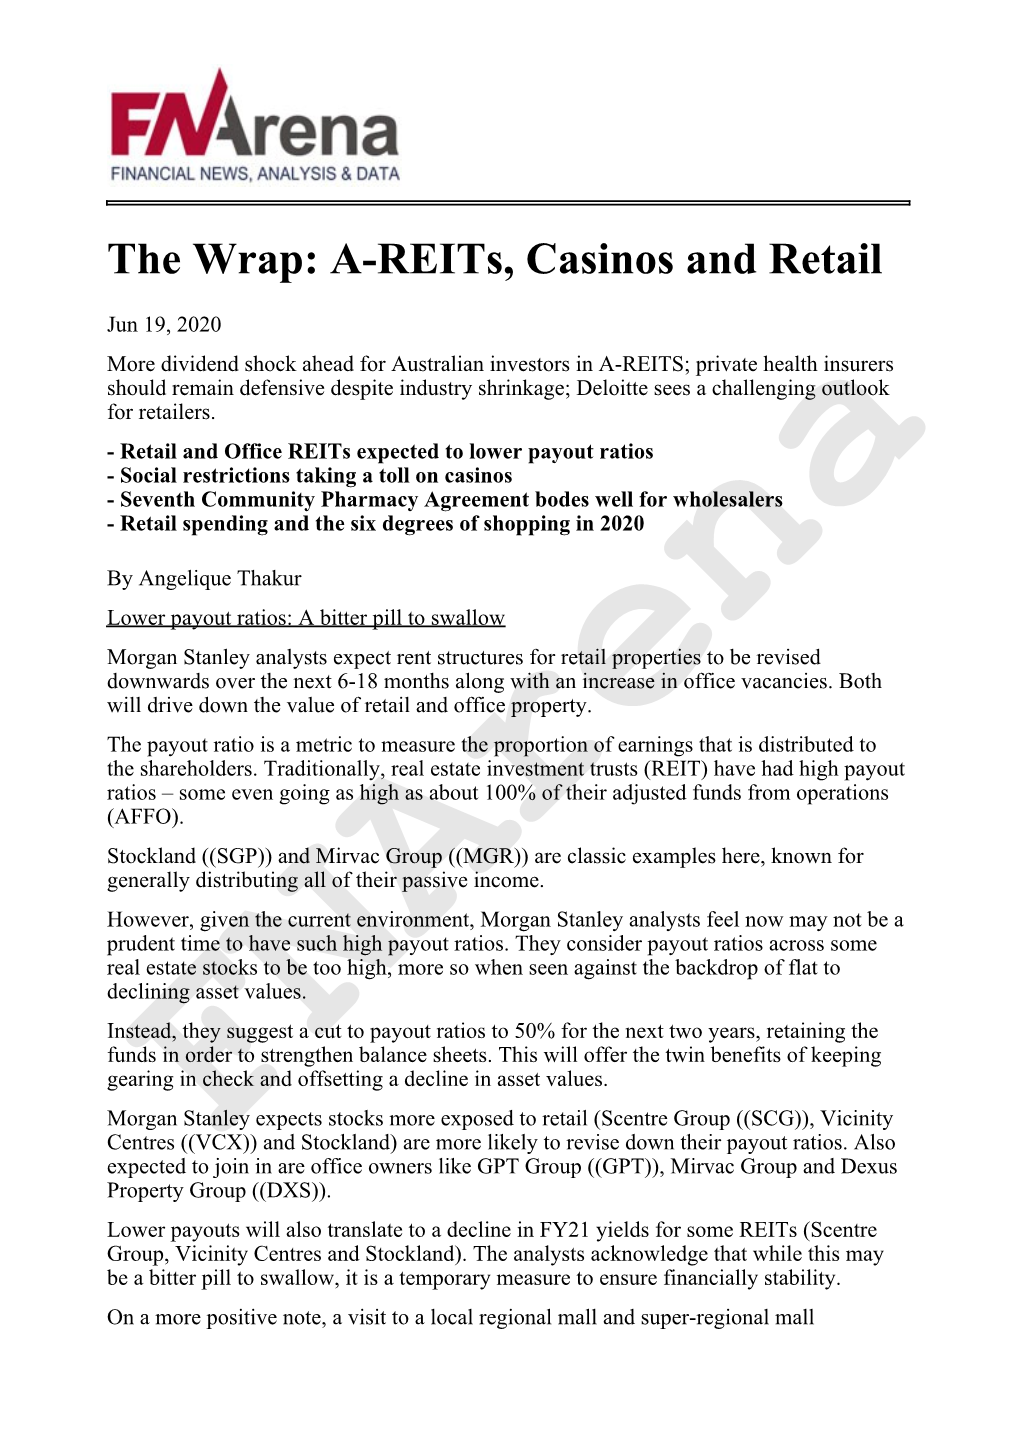 A-Reits, Casinos and Retail